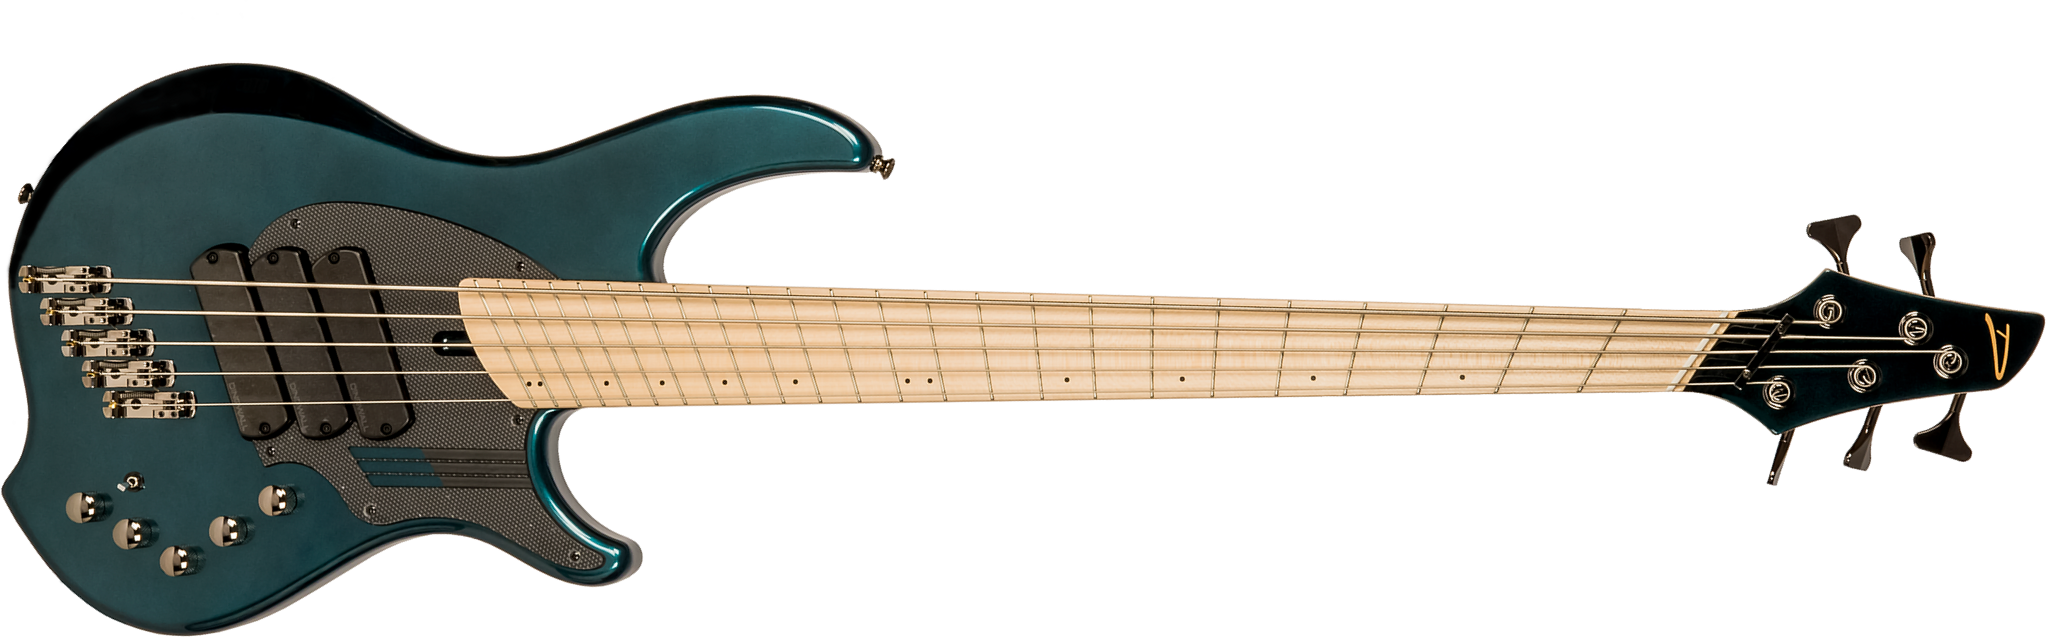 Dingwall Adam Nolly Getgood Ng3 5c Signature 3pu Active Mn - Black Forrest Green - Solid body electric bass - Main picture